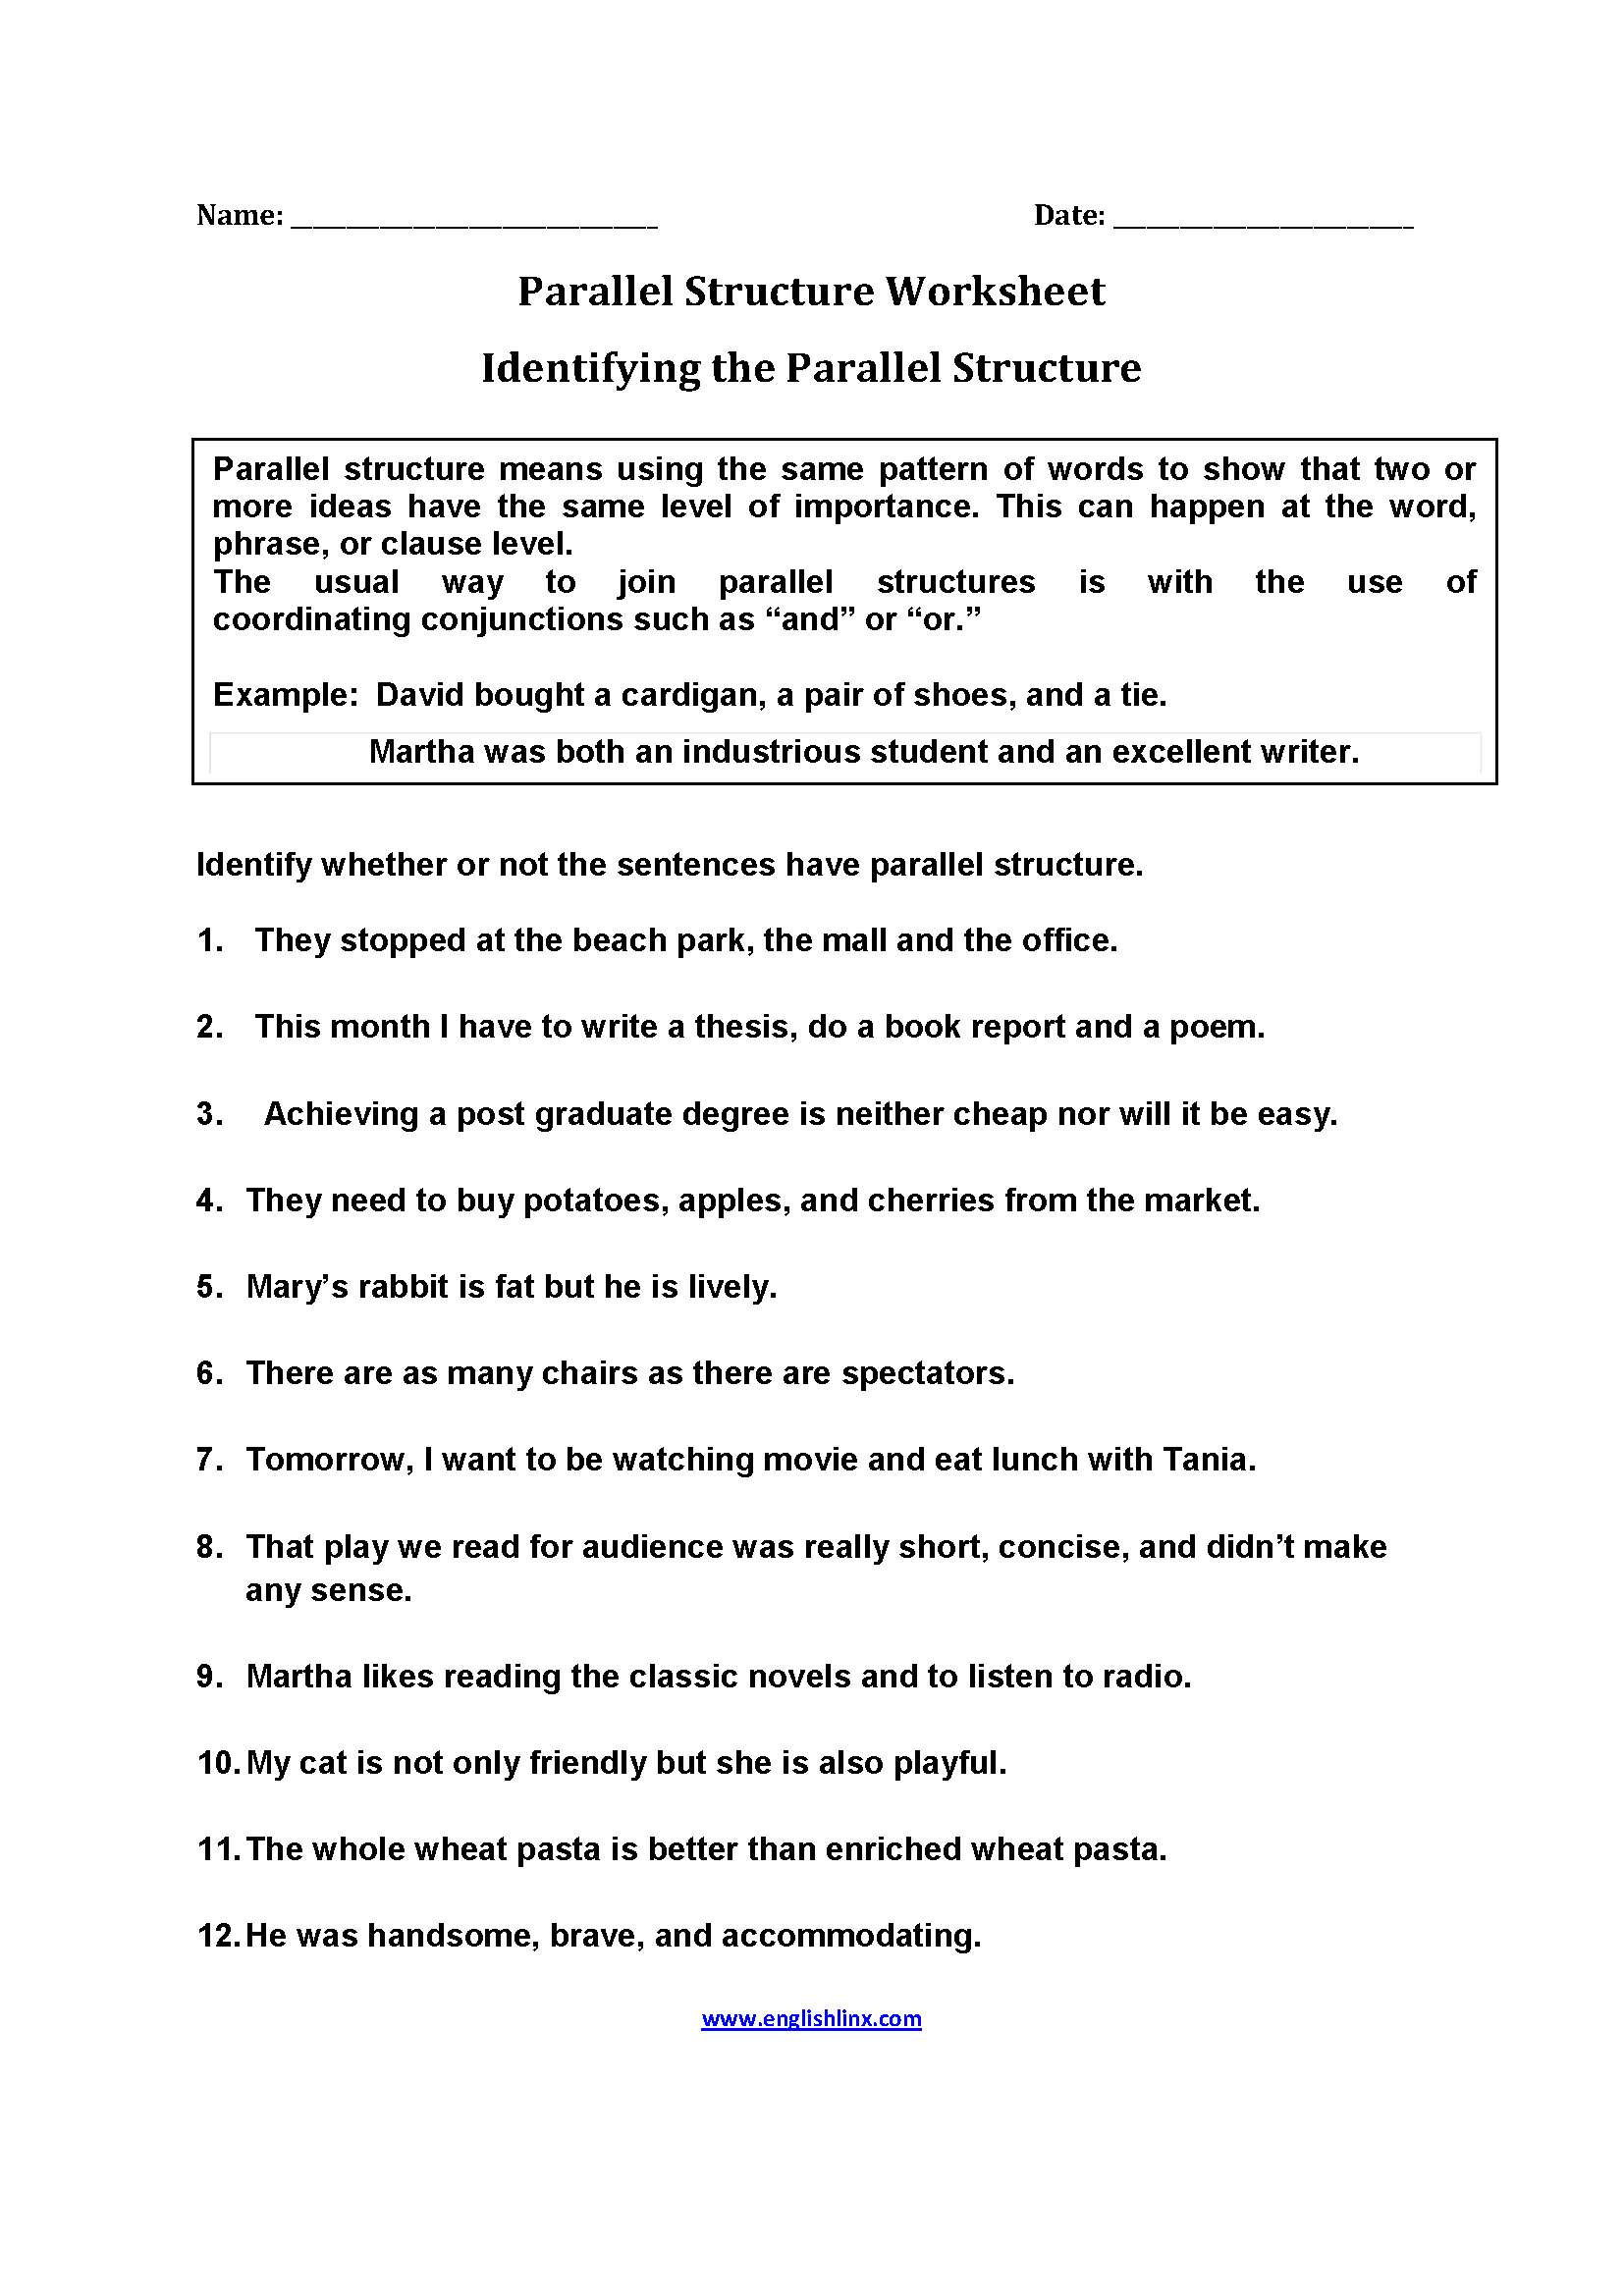 Parallel Structure Worksheet 1 Answer Key